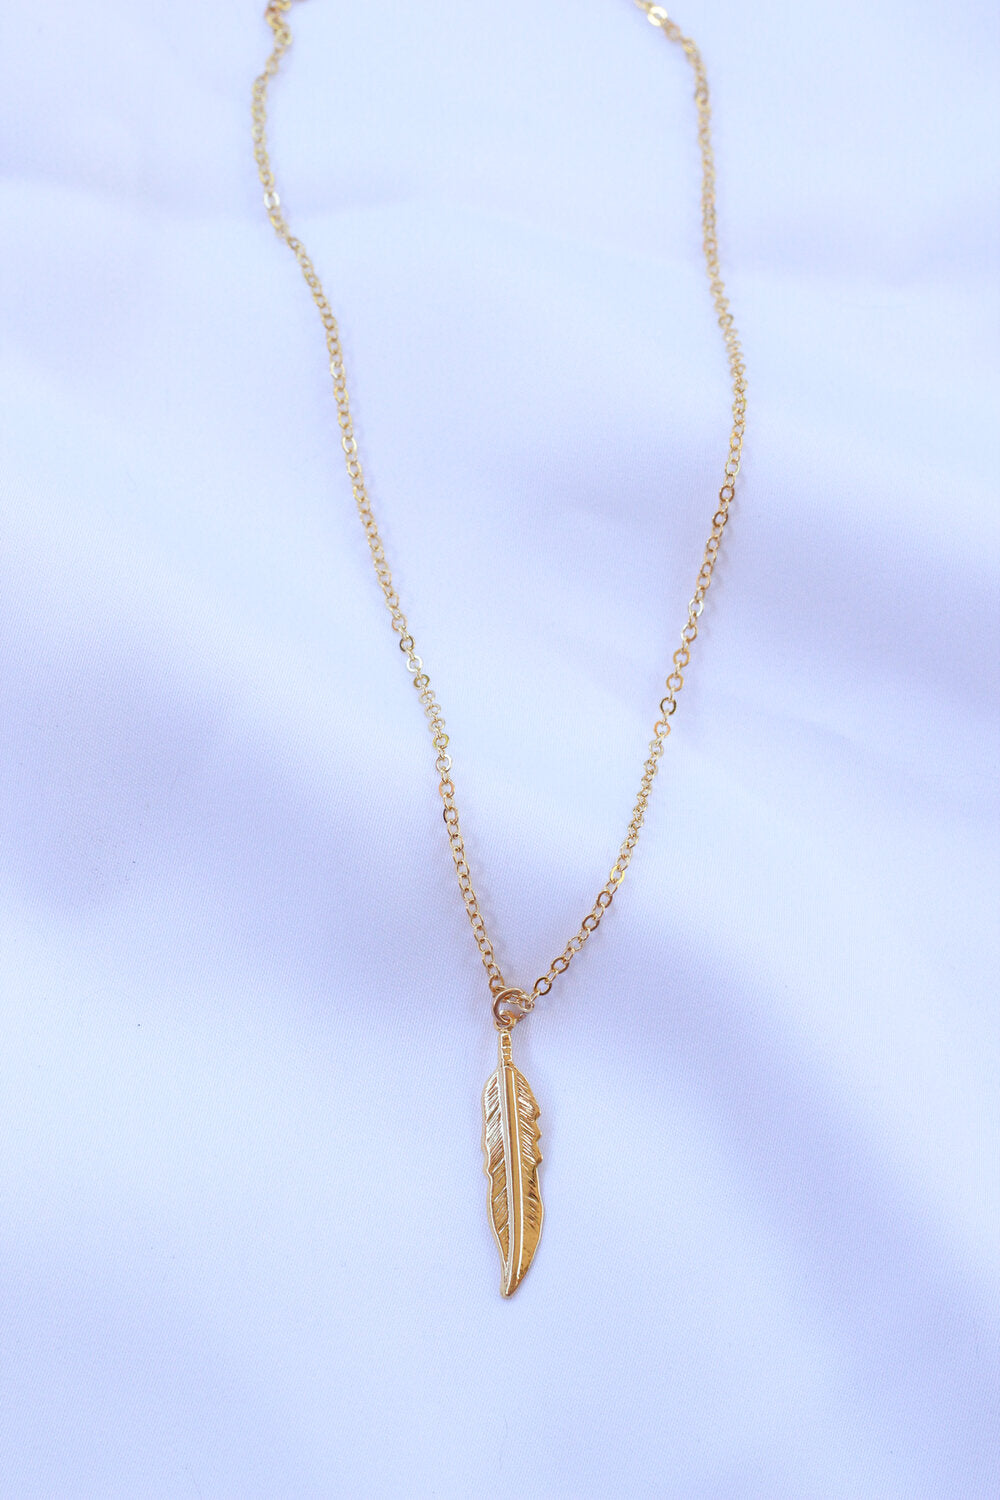 Golden Feather necklace